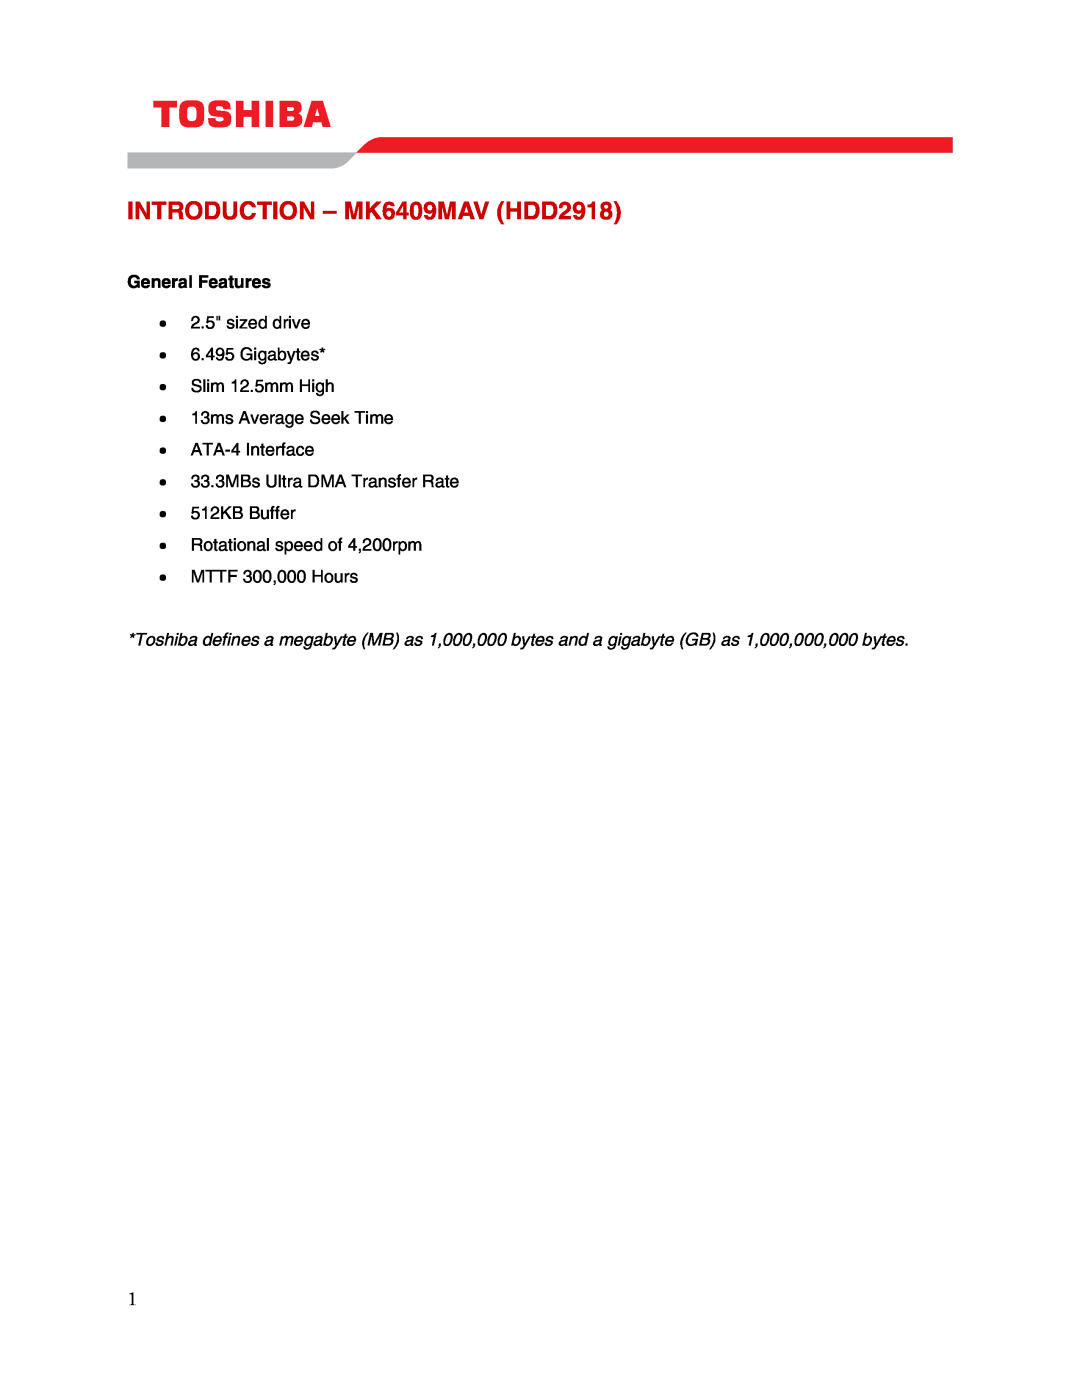 Toshiba user manual INTRODUCTION - MK6409MAV HDD2918, General Features 